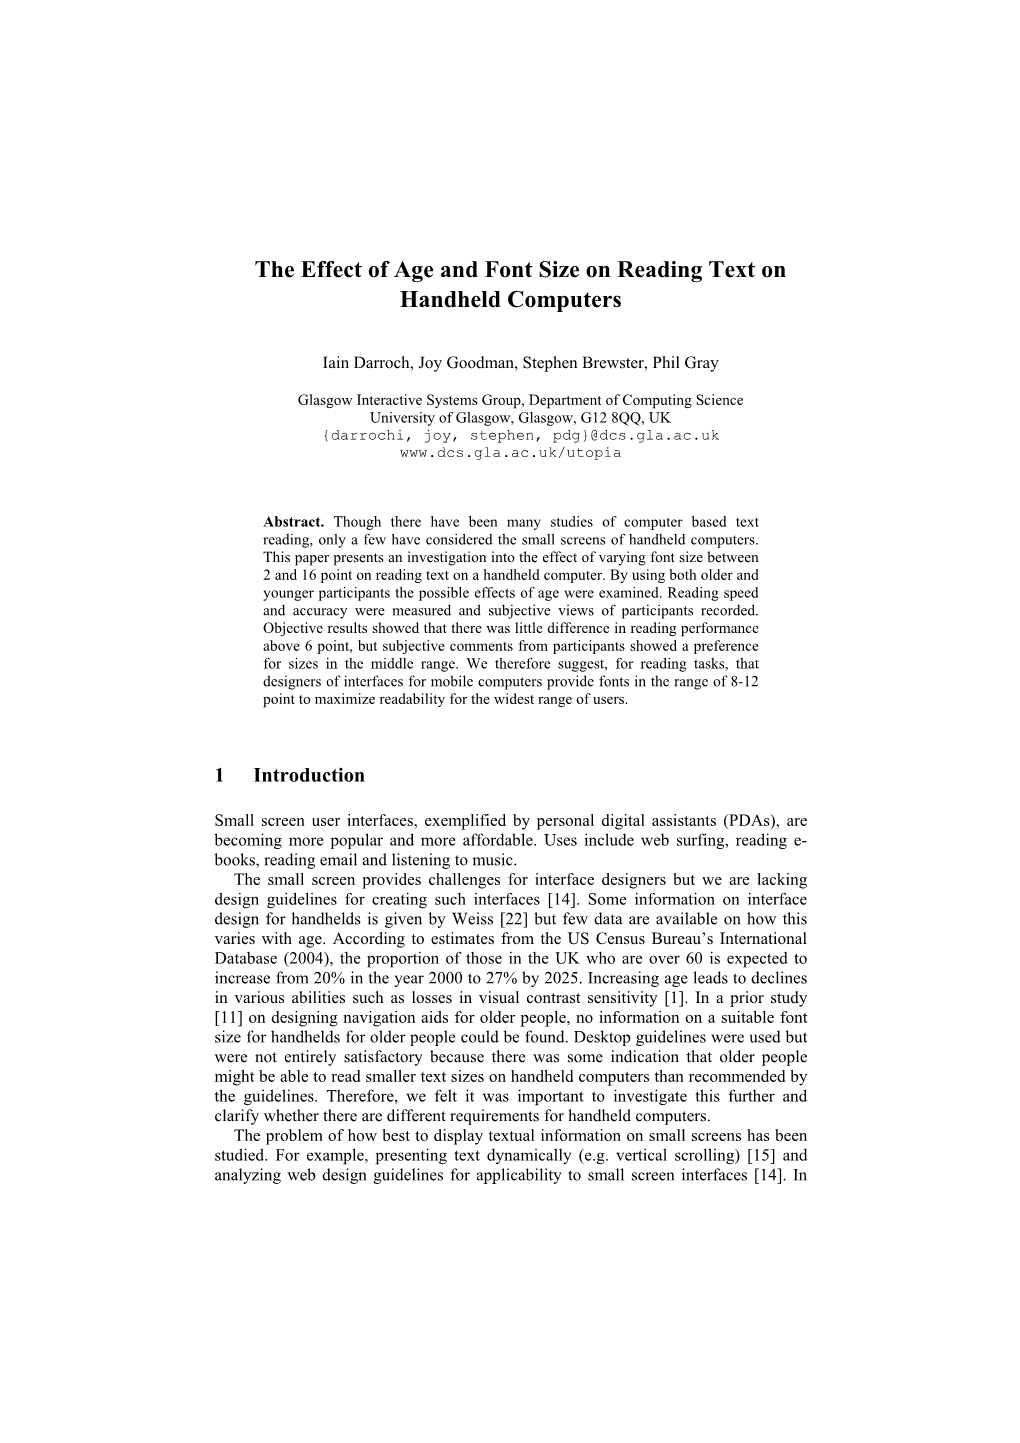 The Effect of Age and Font Size on Reading Text on Handheld Computers